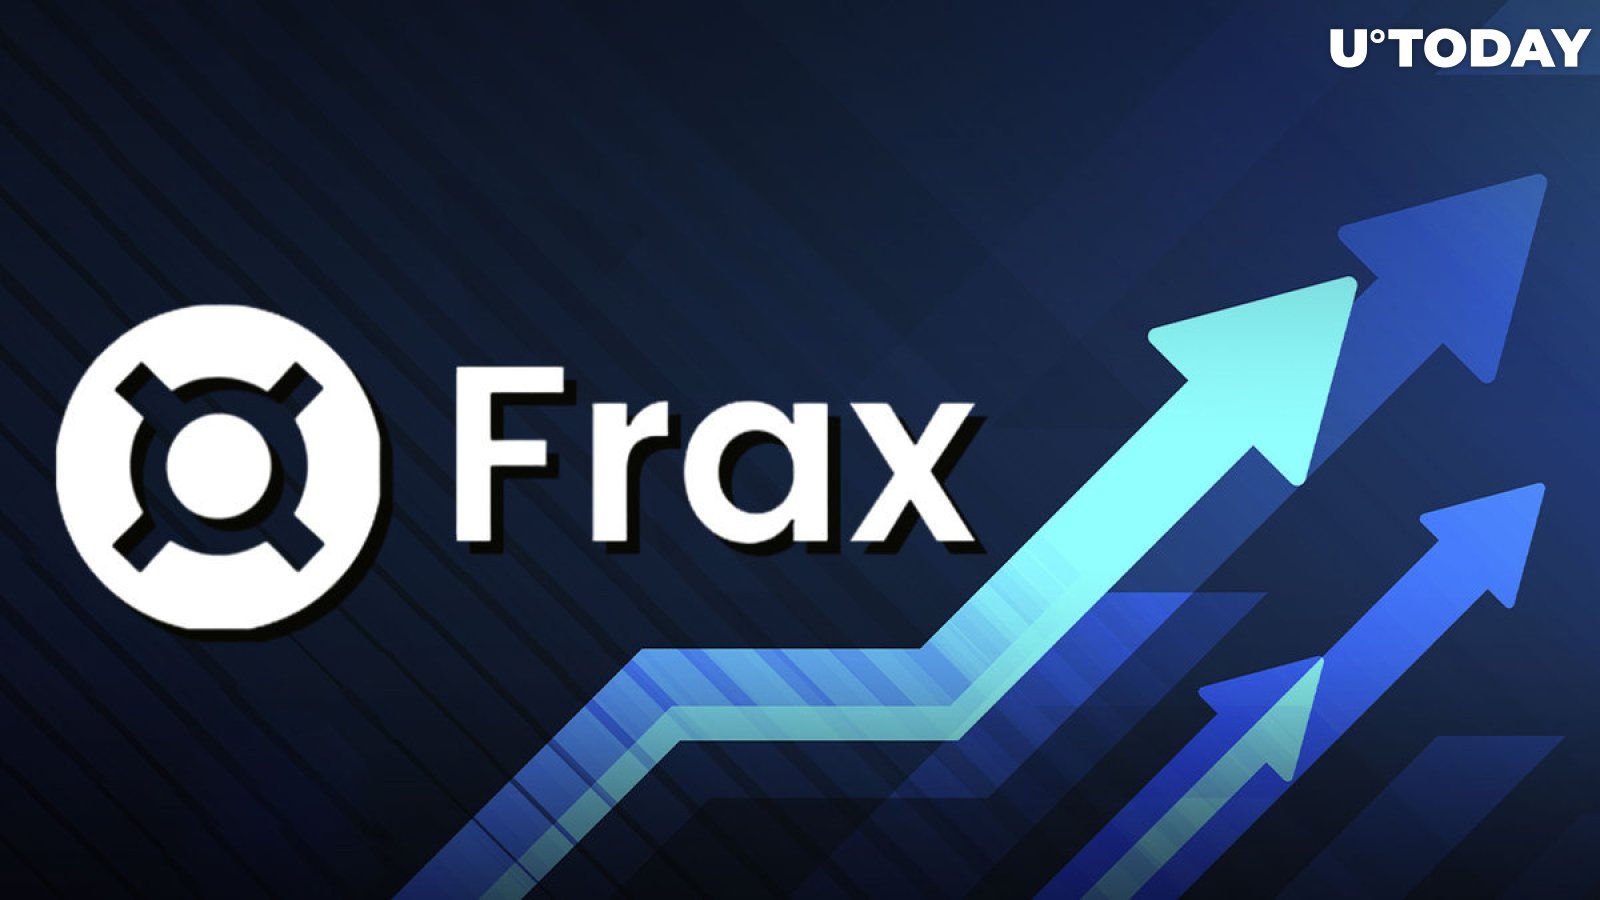 FXS Price Spikes Over $5 as Ethereum (ETH) Gets Closer to Frax Finance's L2